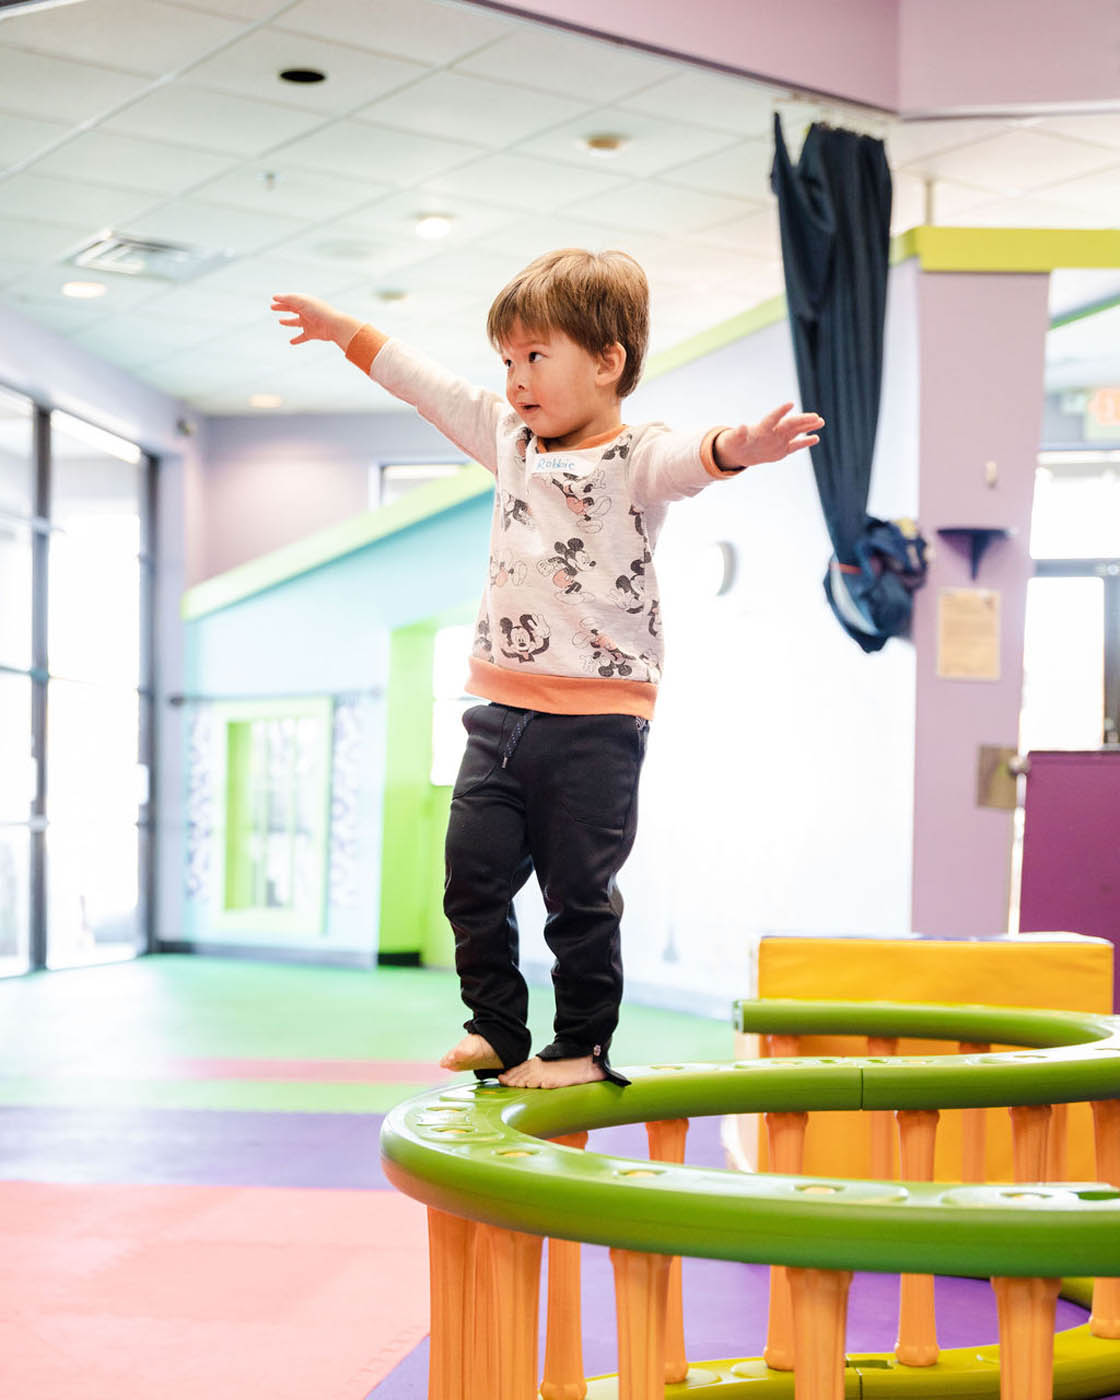 A little boy balancing on gym equipment, contact us today about our playgroup.